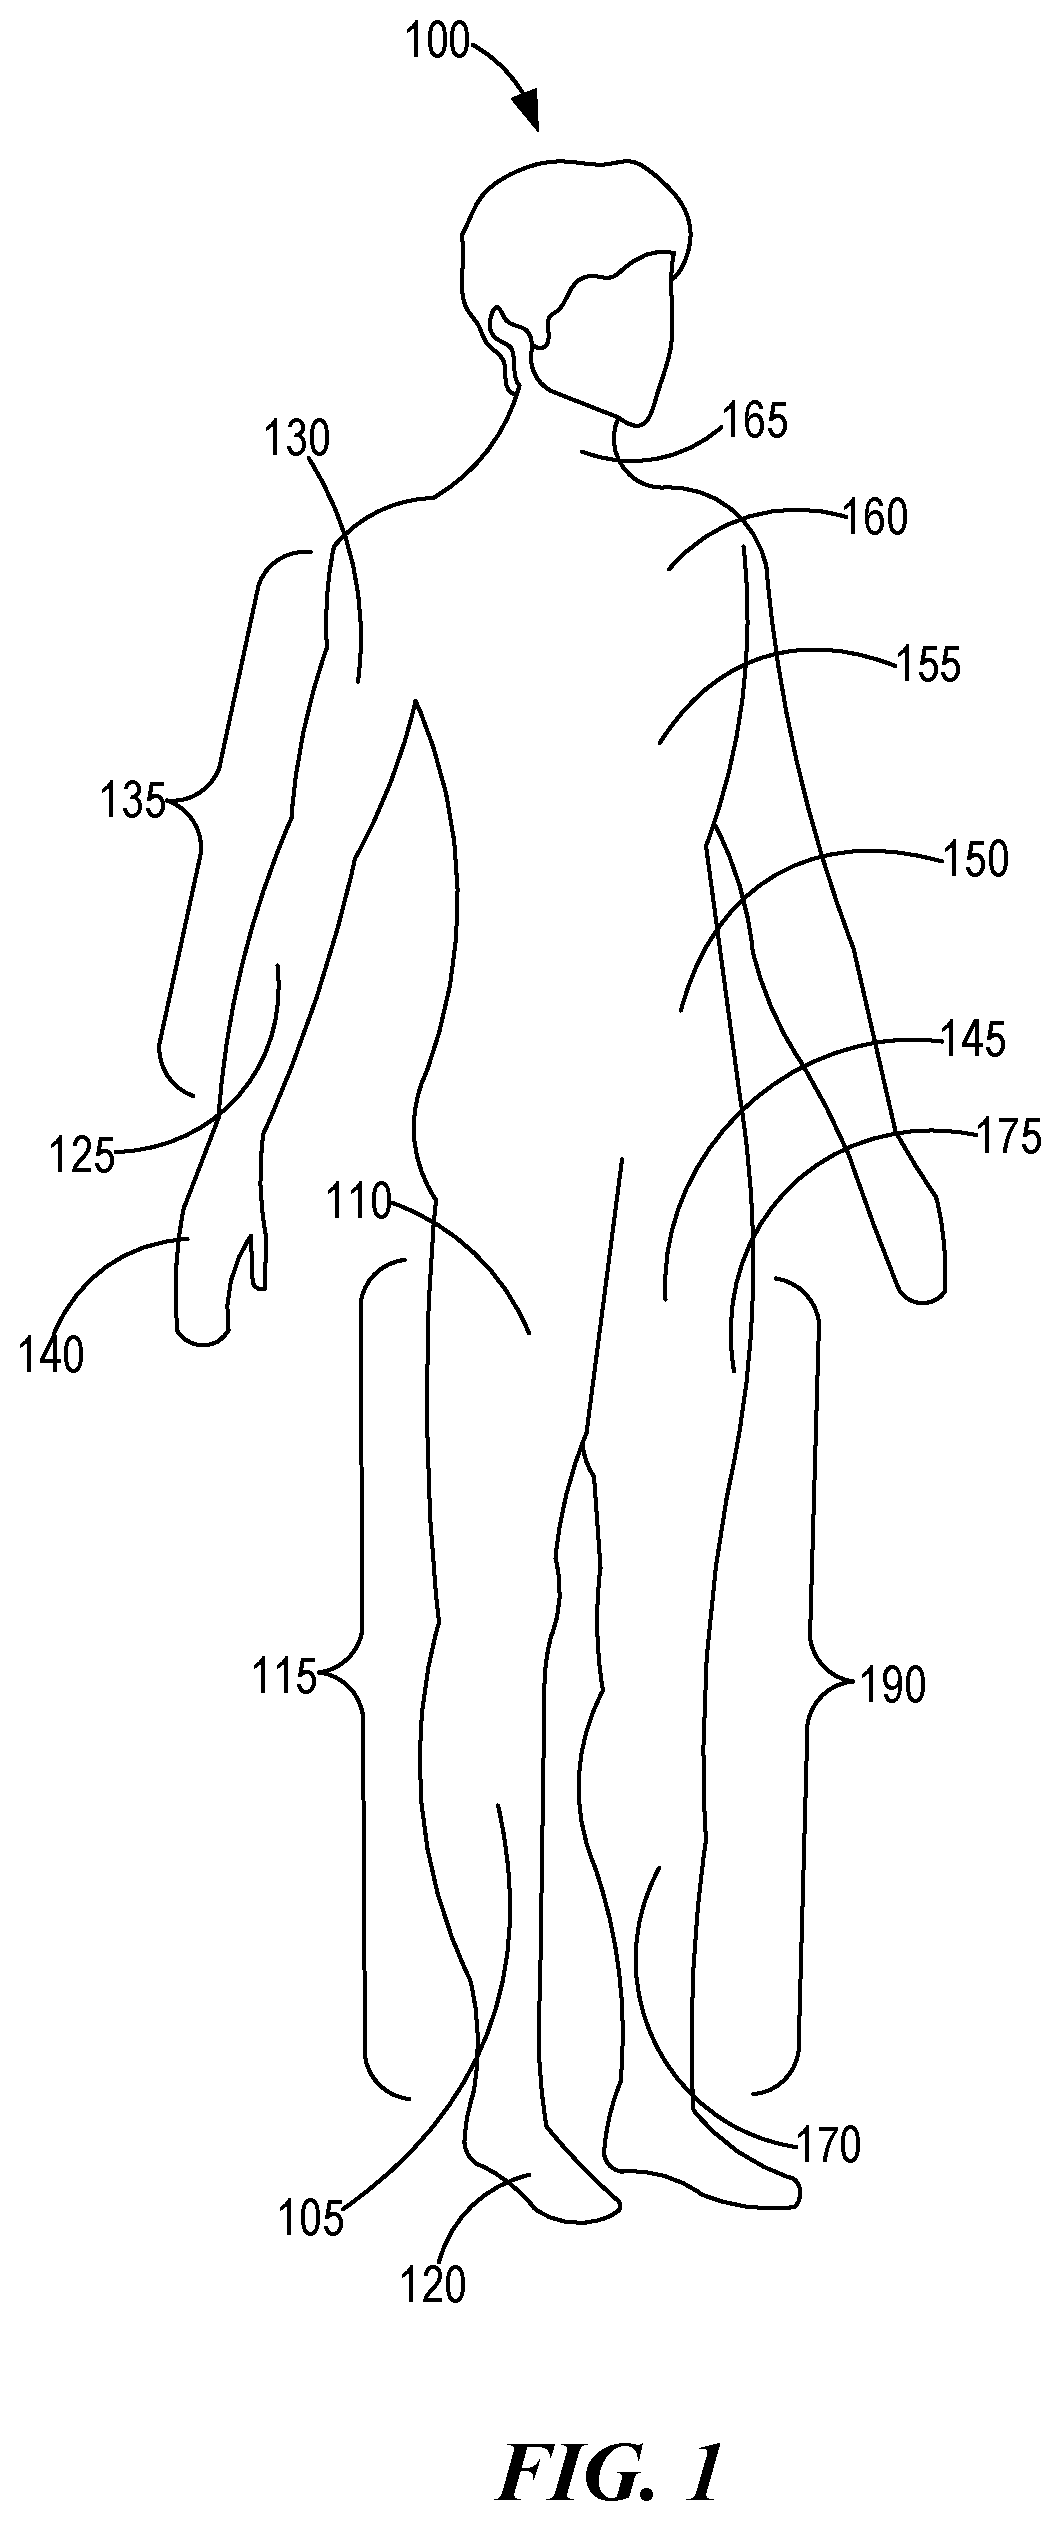 Identifying body part or body area anatomical landmarks from digital imagery for the fitting of compression garments for a person in need thereof